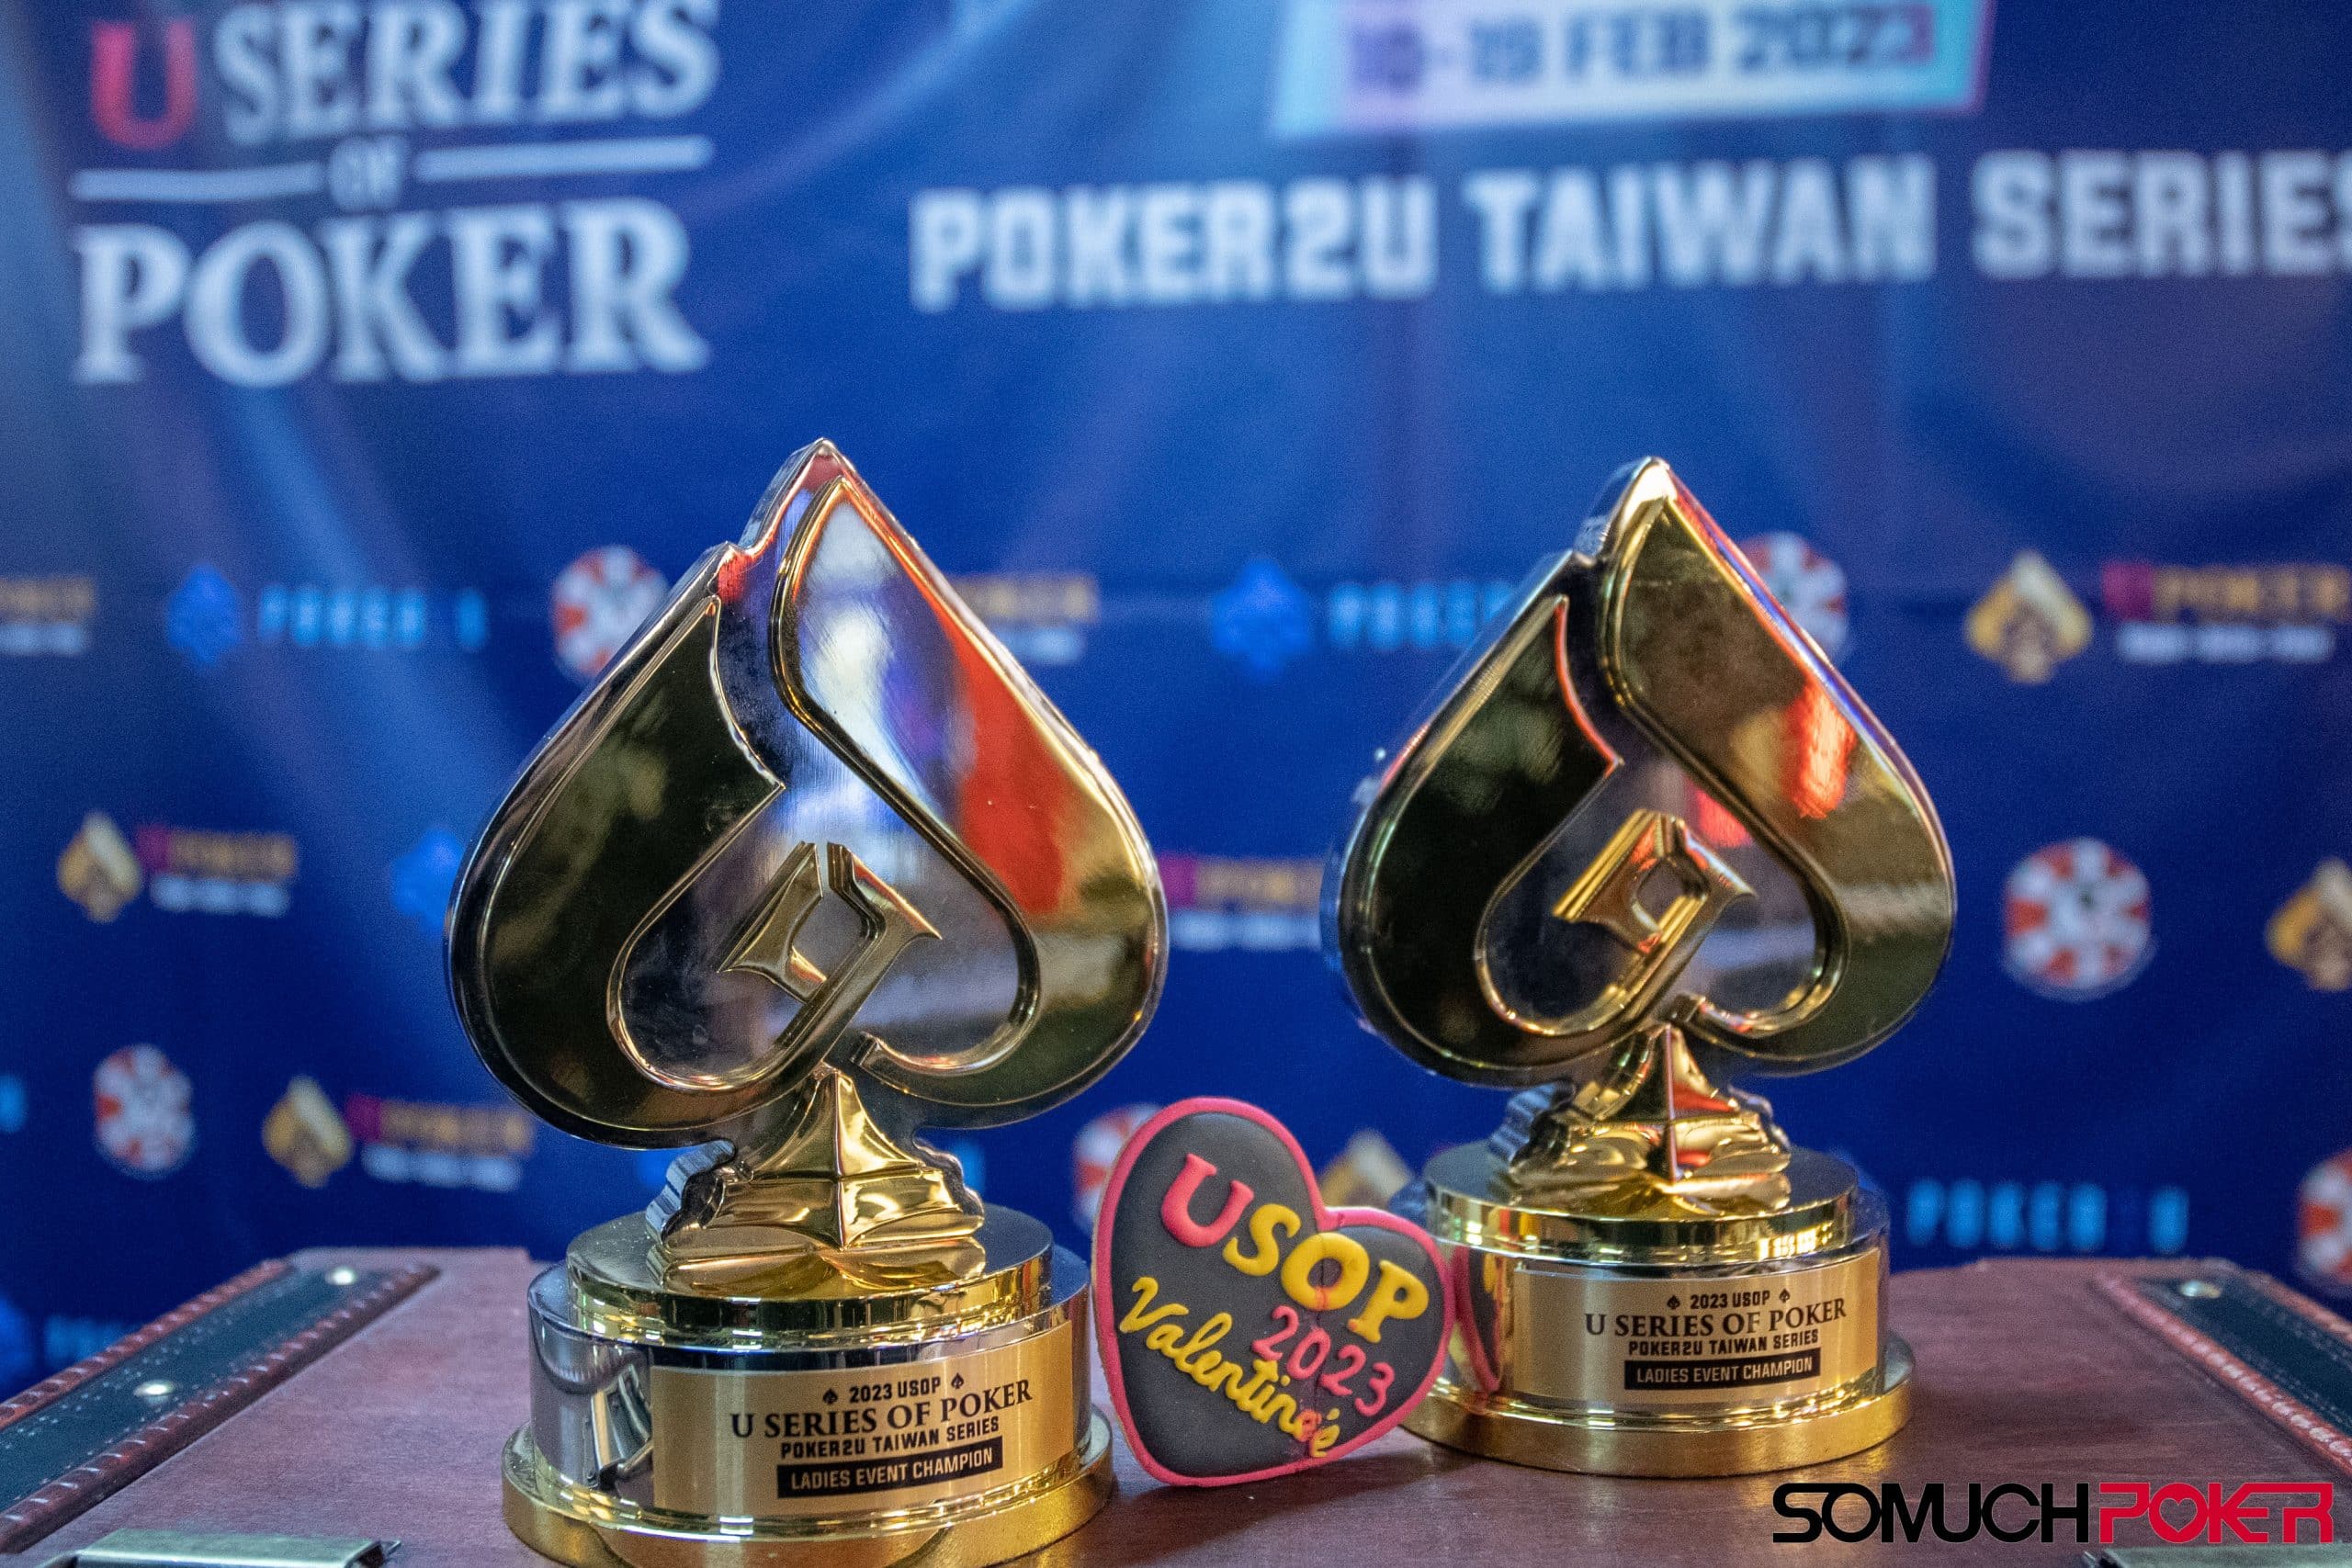 USOP: Poker2U Taiwan Series: Hot lineup today featuring High Roller 3M gtd and Ladies Event; Hon Cheong Lee, Isaac Phua, 傅子袁, 黃政傑, 王淨加 win trophies